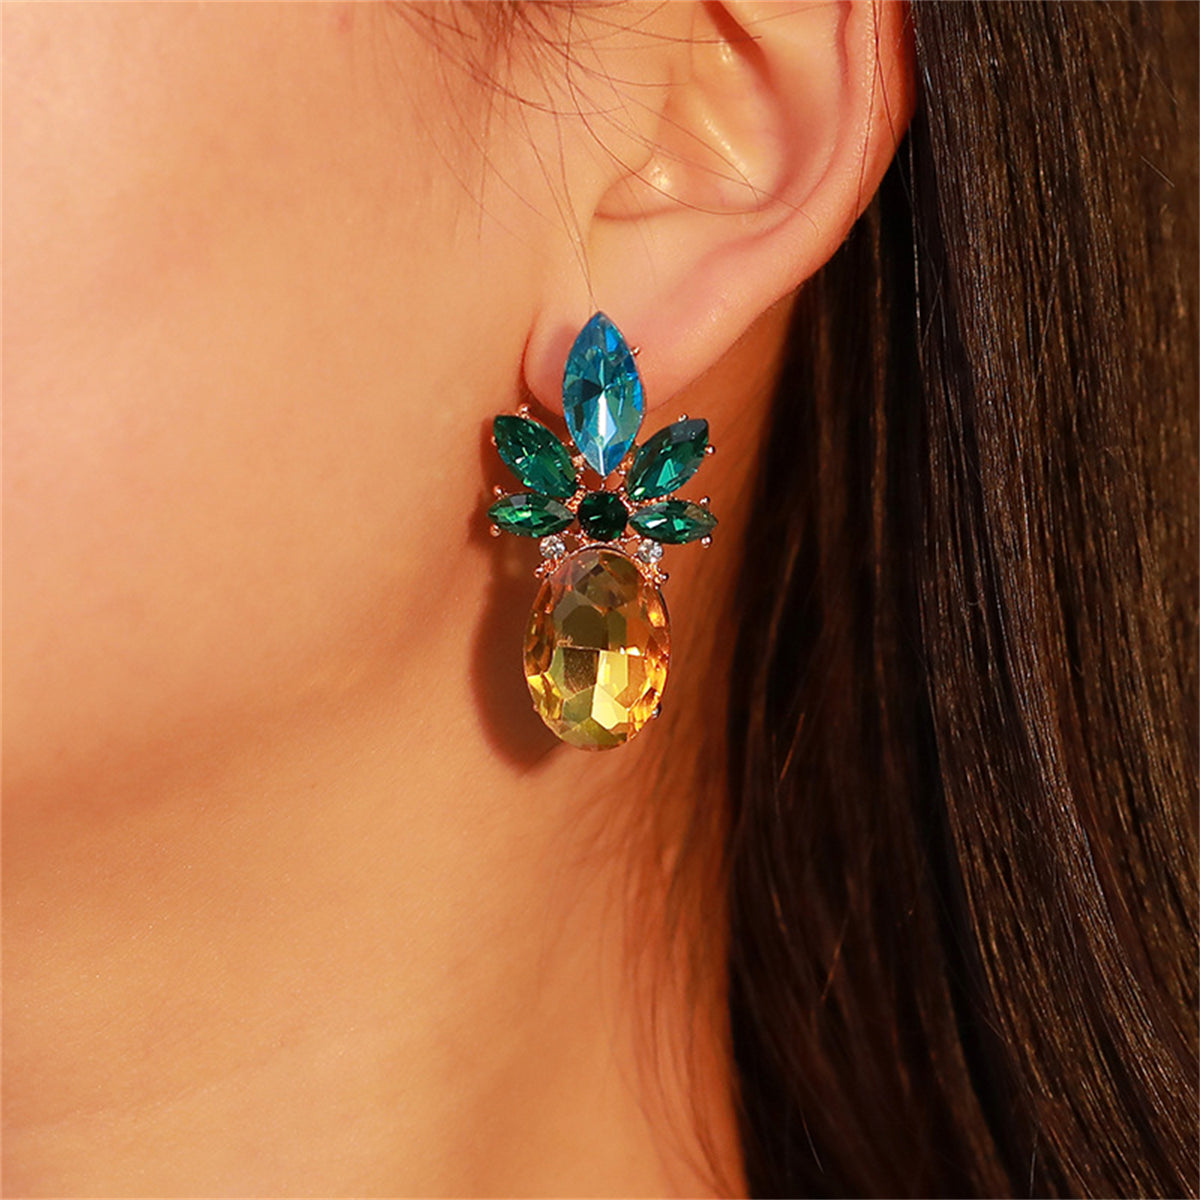 Colored Crystal & 18K Gold-Plated Pineapple Drop Earrings